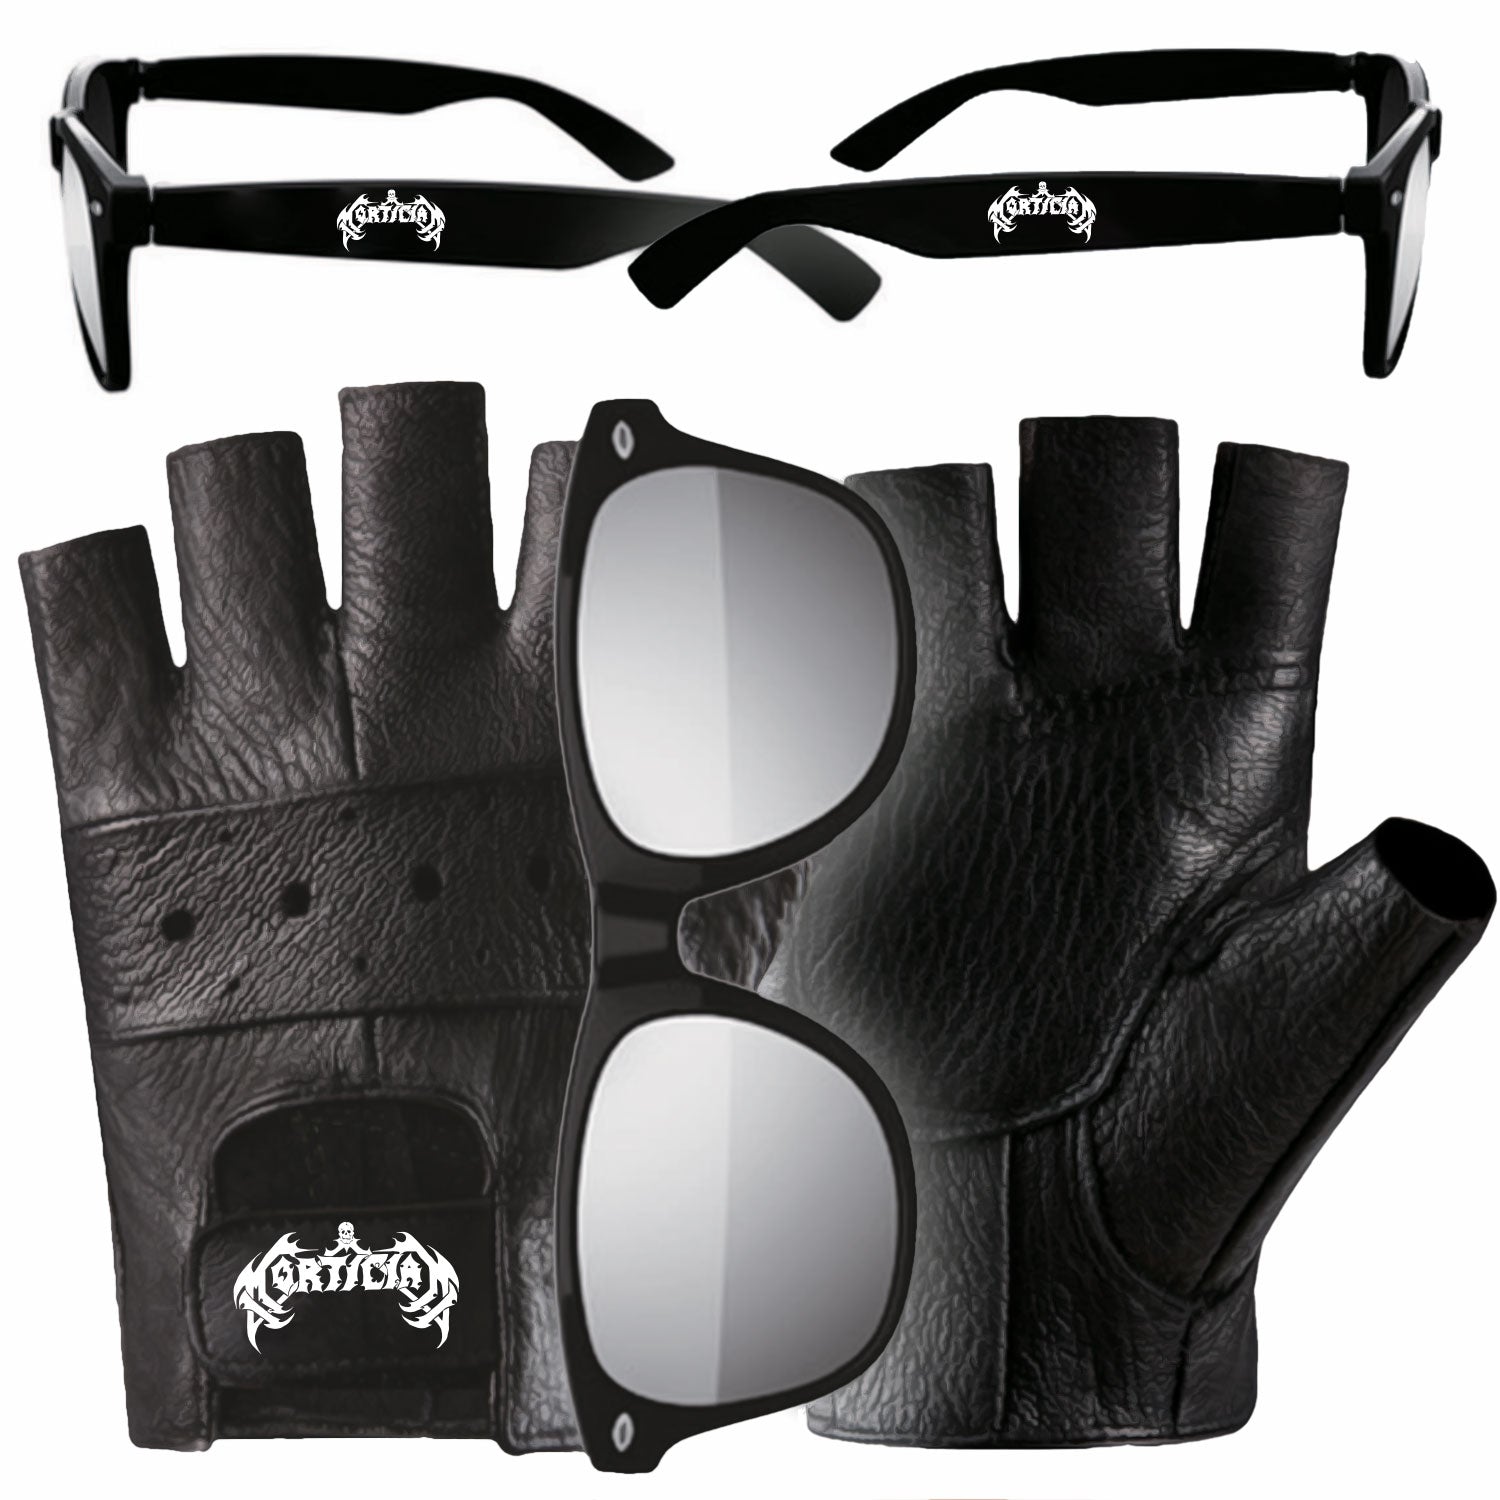 Mortician "Gloves and Sunglasses Set"